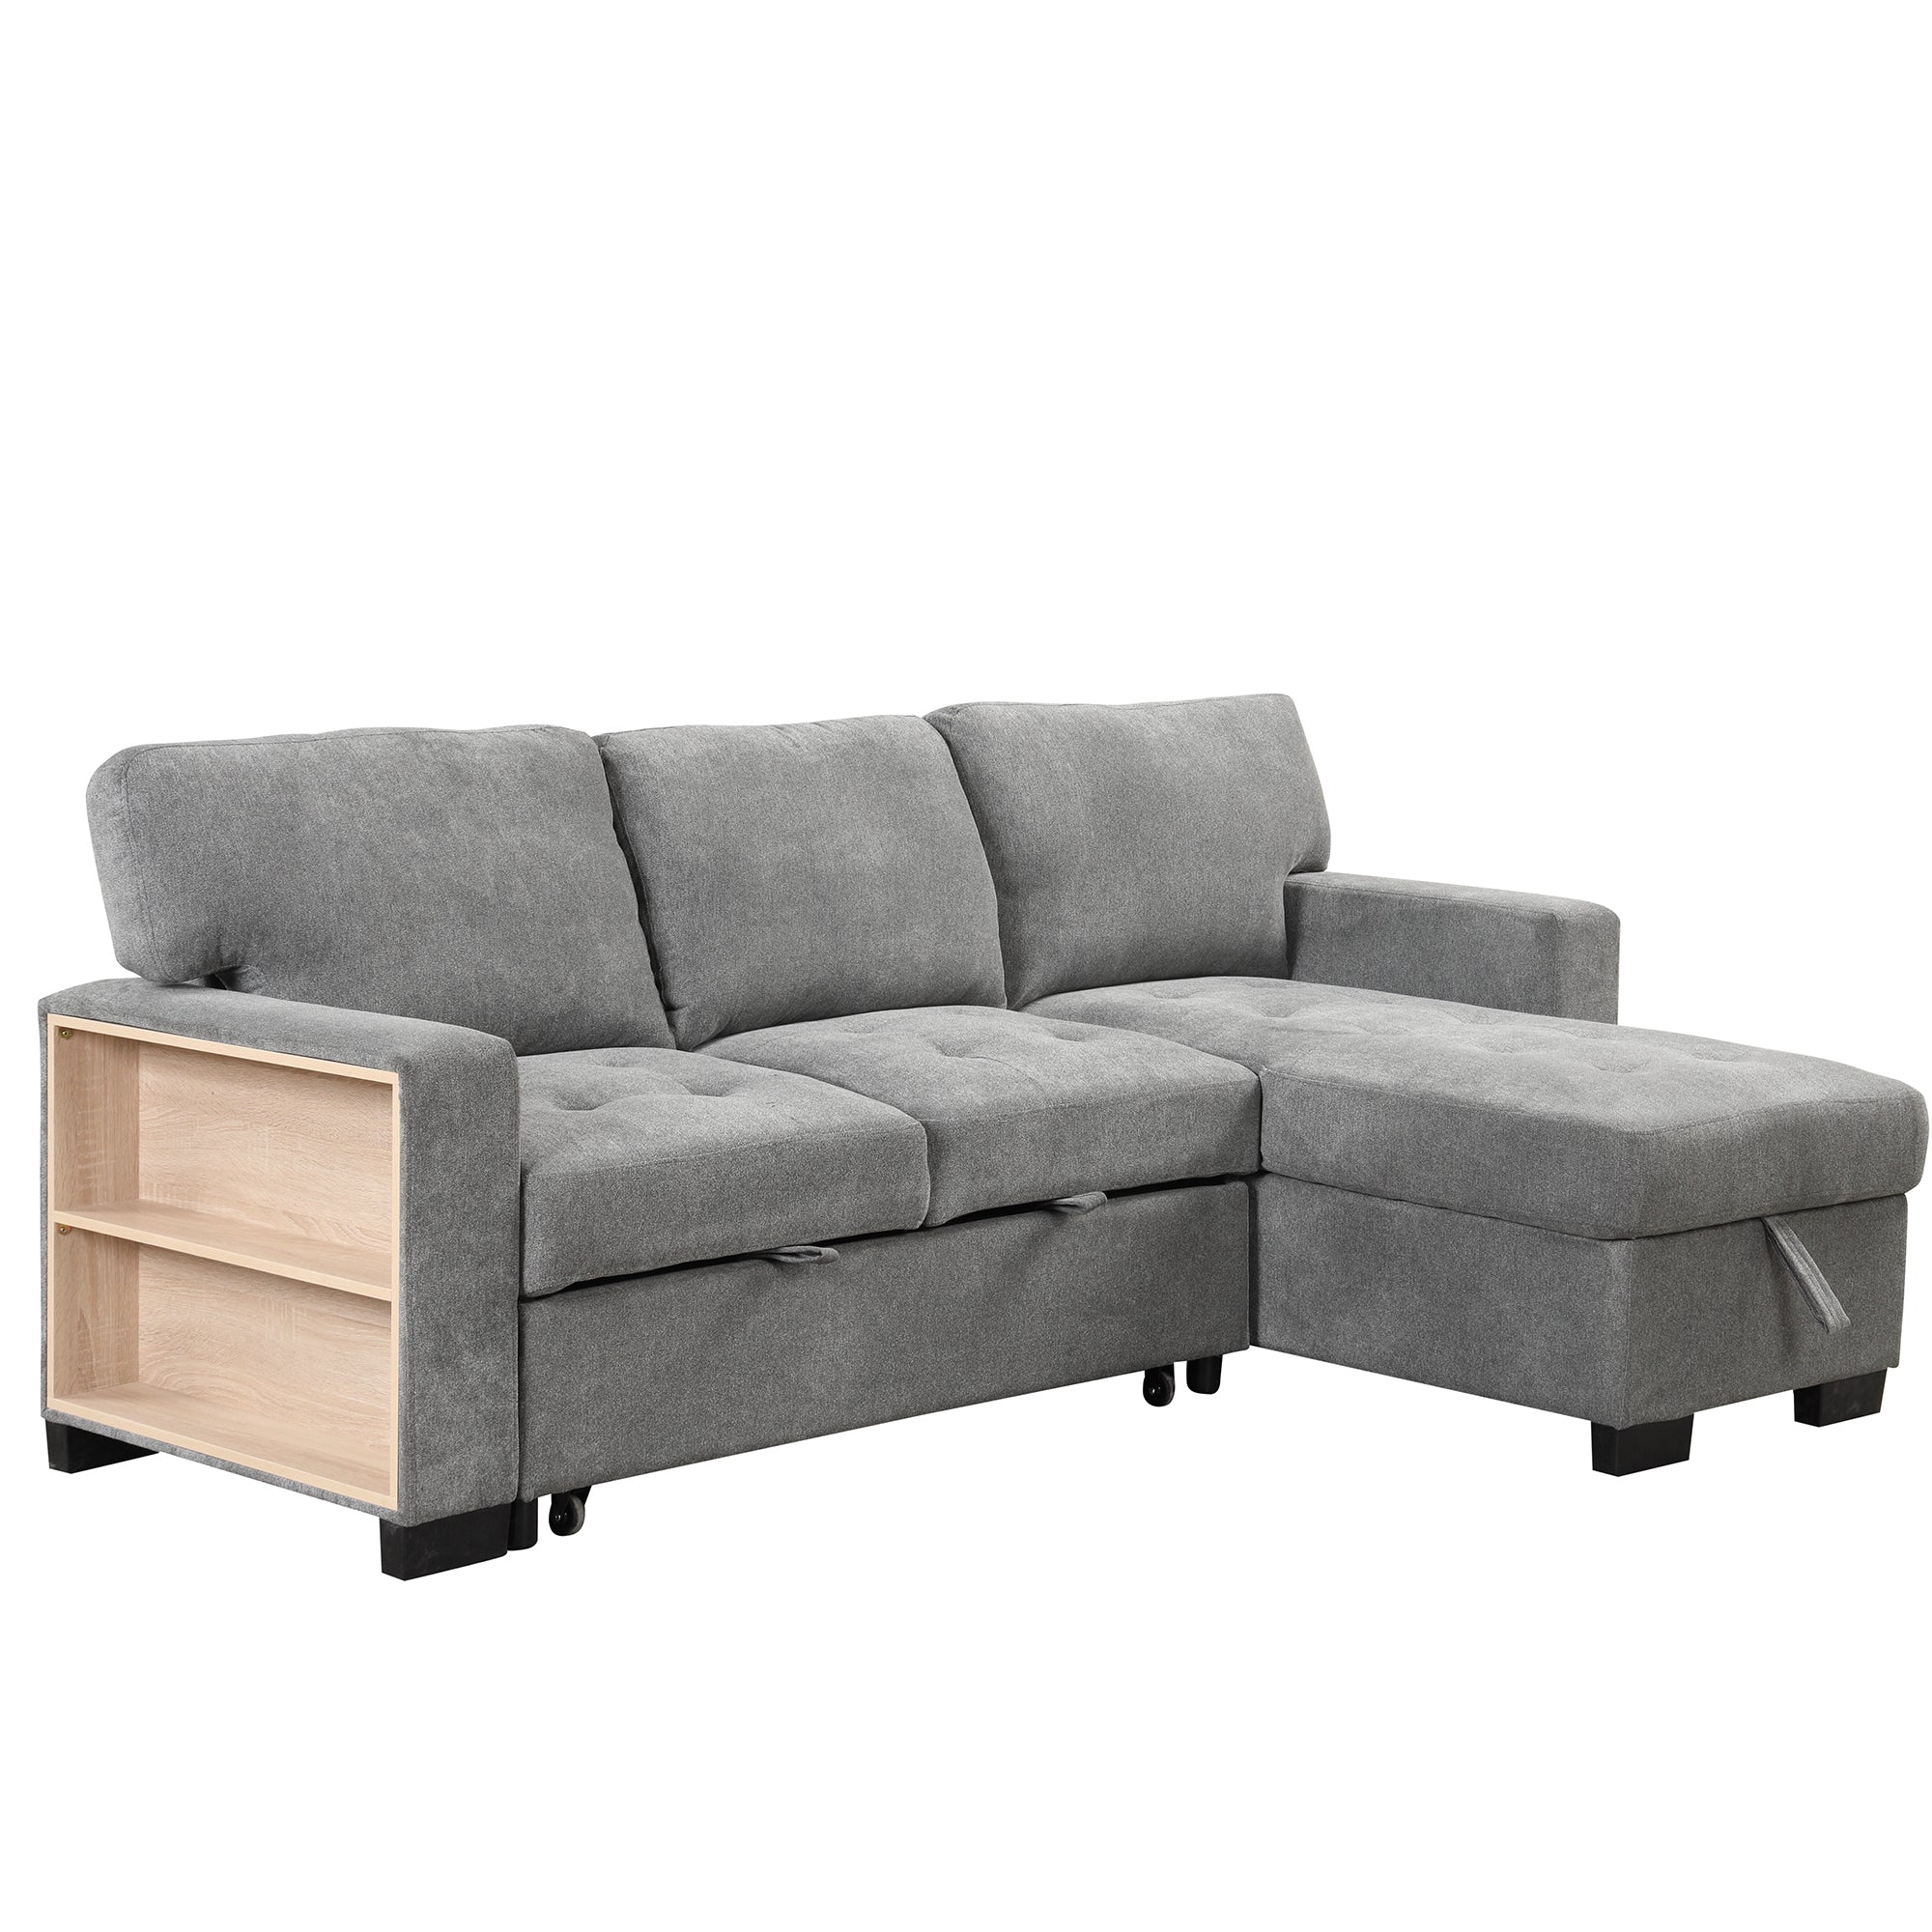 Stylish and Functional Light Chaise Lounge Sectional with Storage Rack, Pull-out Bed, Drop Down Table, and USB Charger | Gray | Ideal Addition to Your Living Space